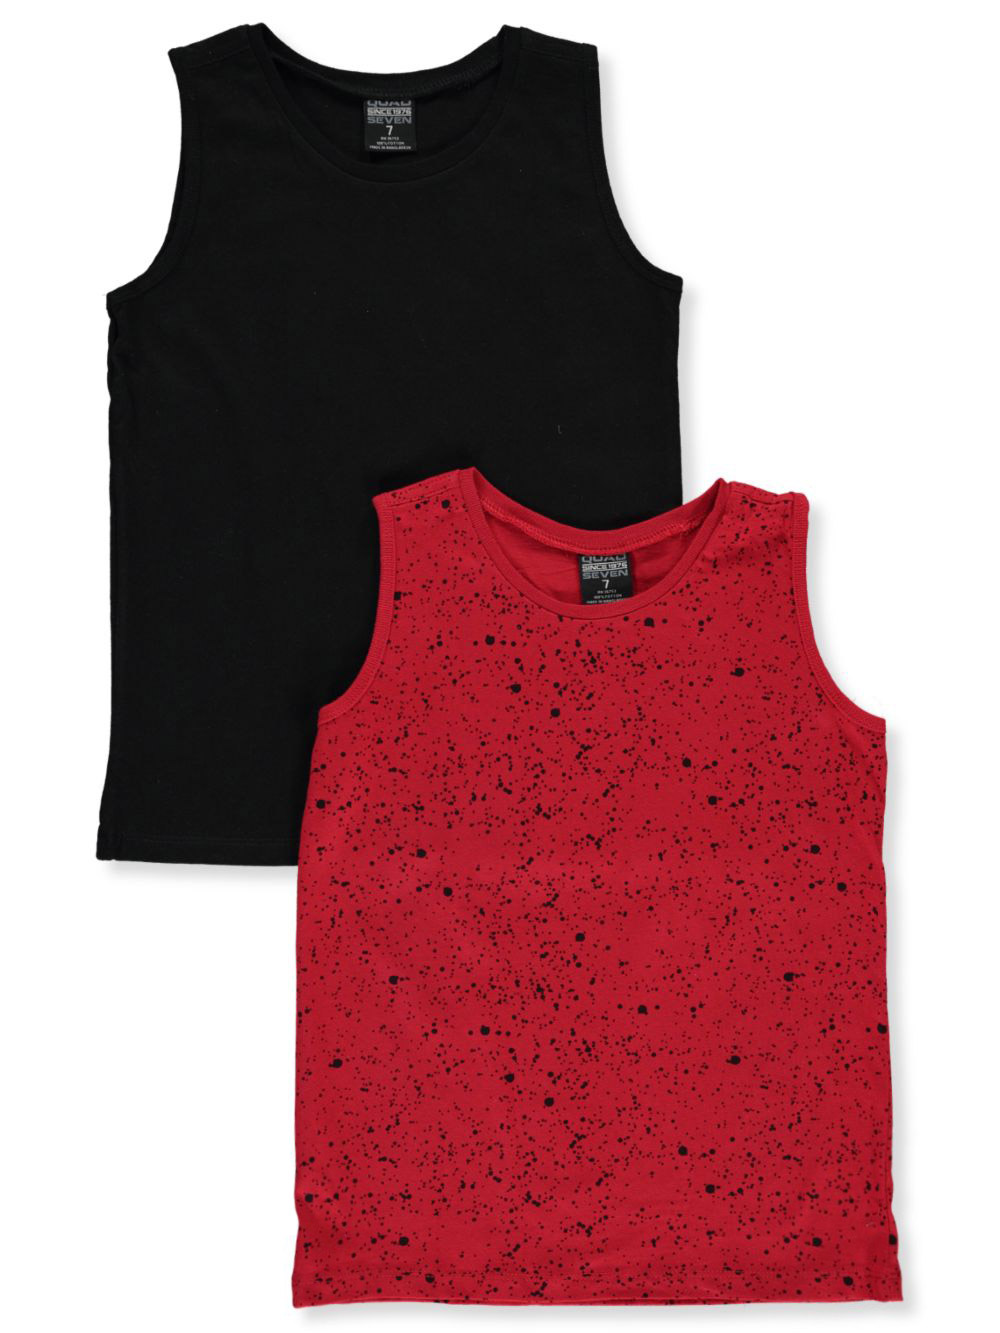 Black and Red Tank